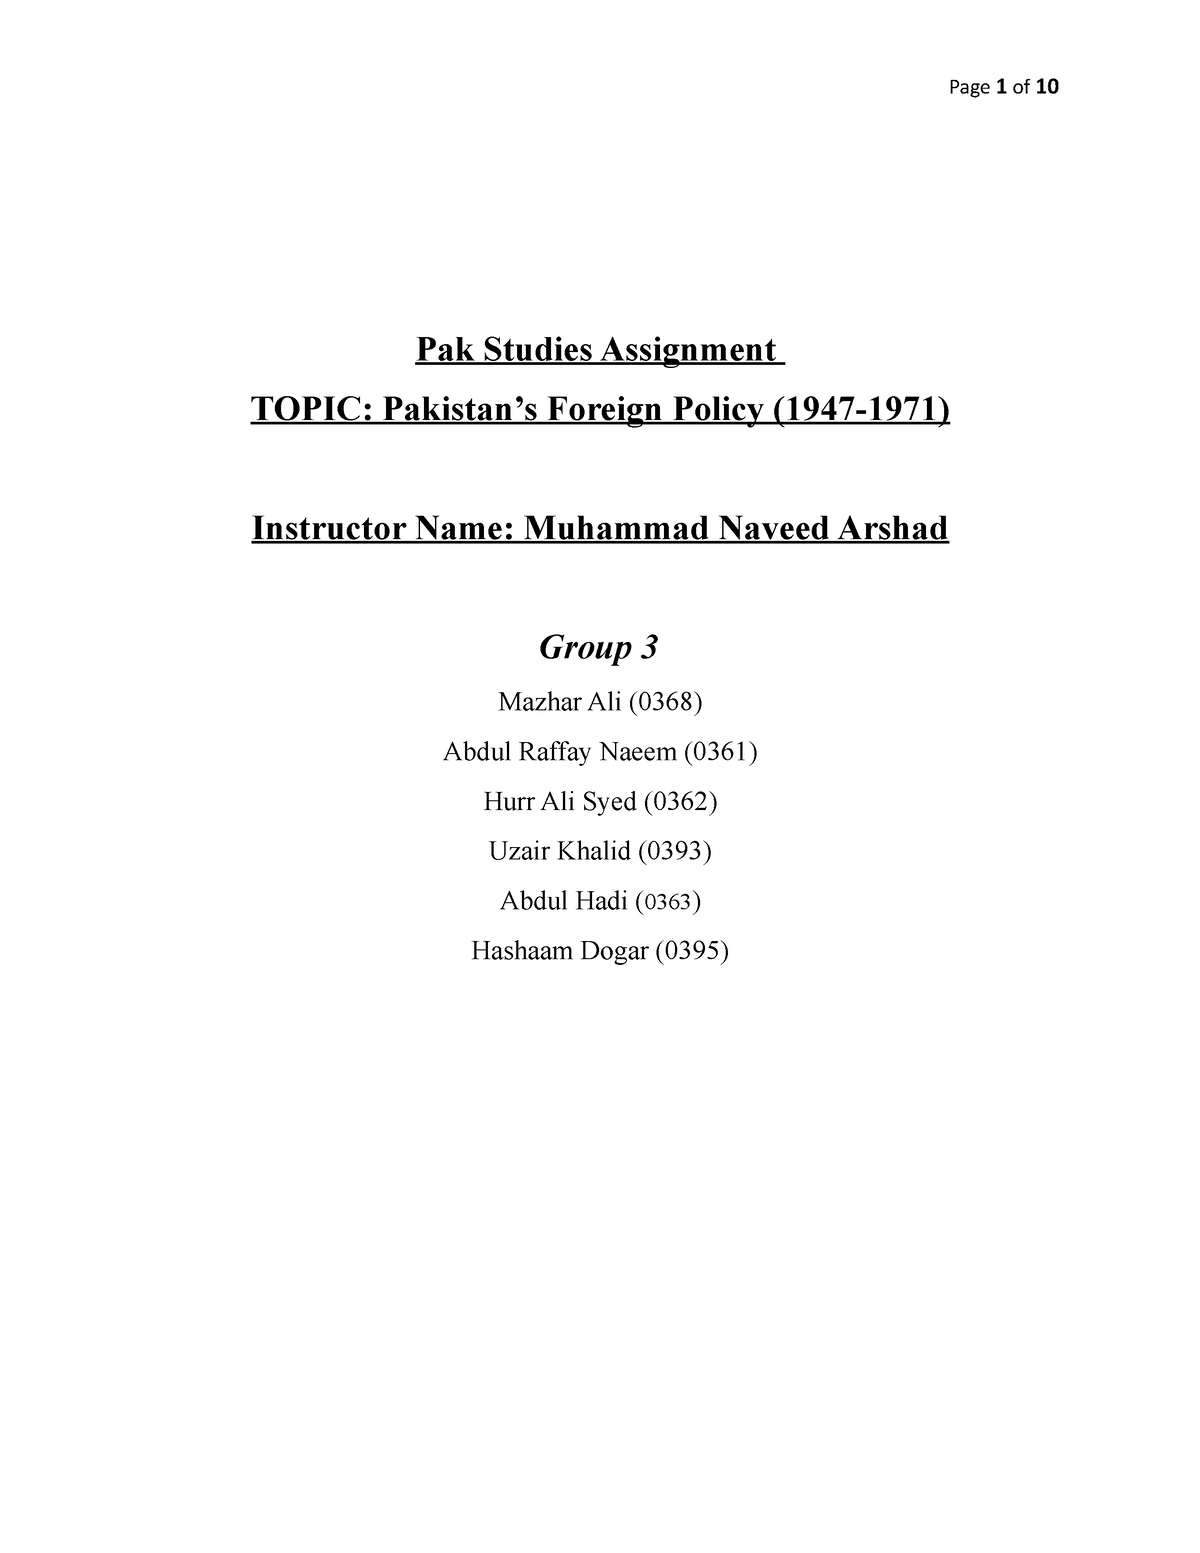 assignment on foreign policy of pakistan